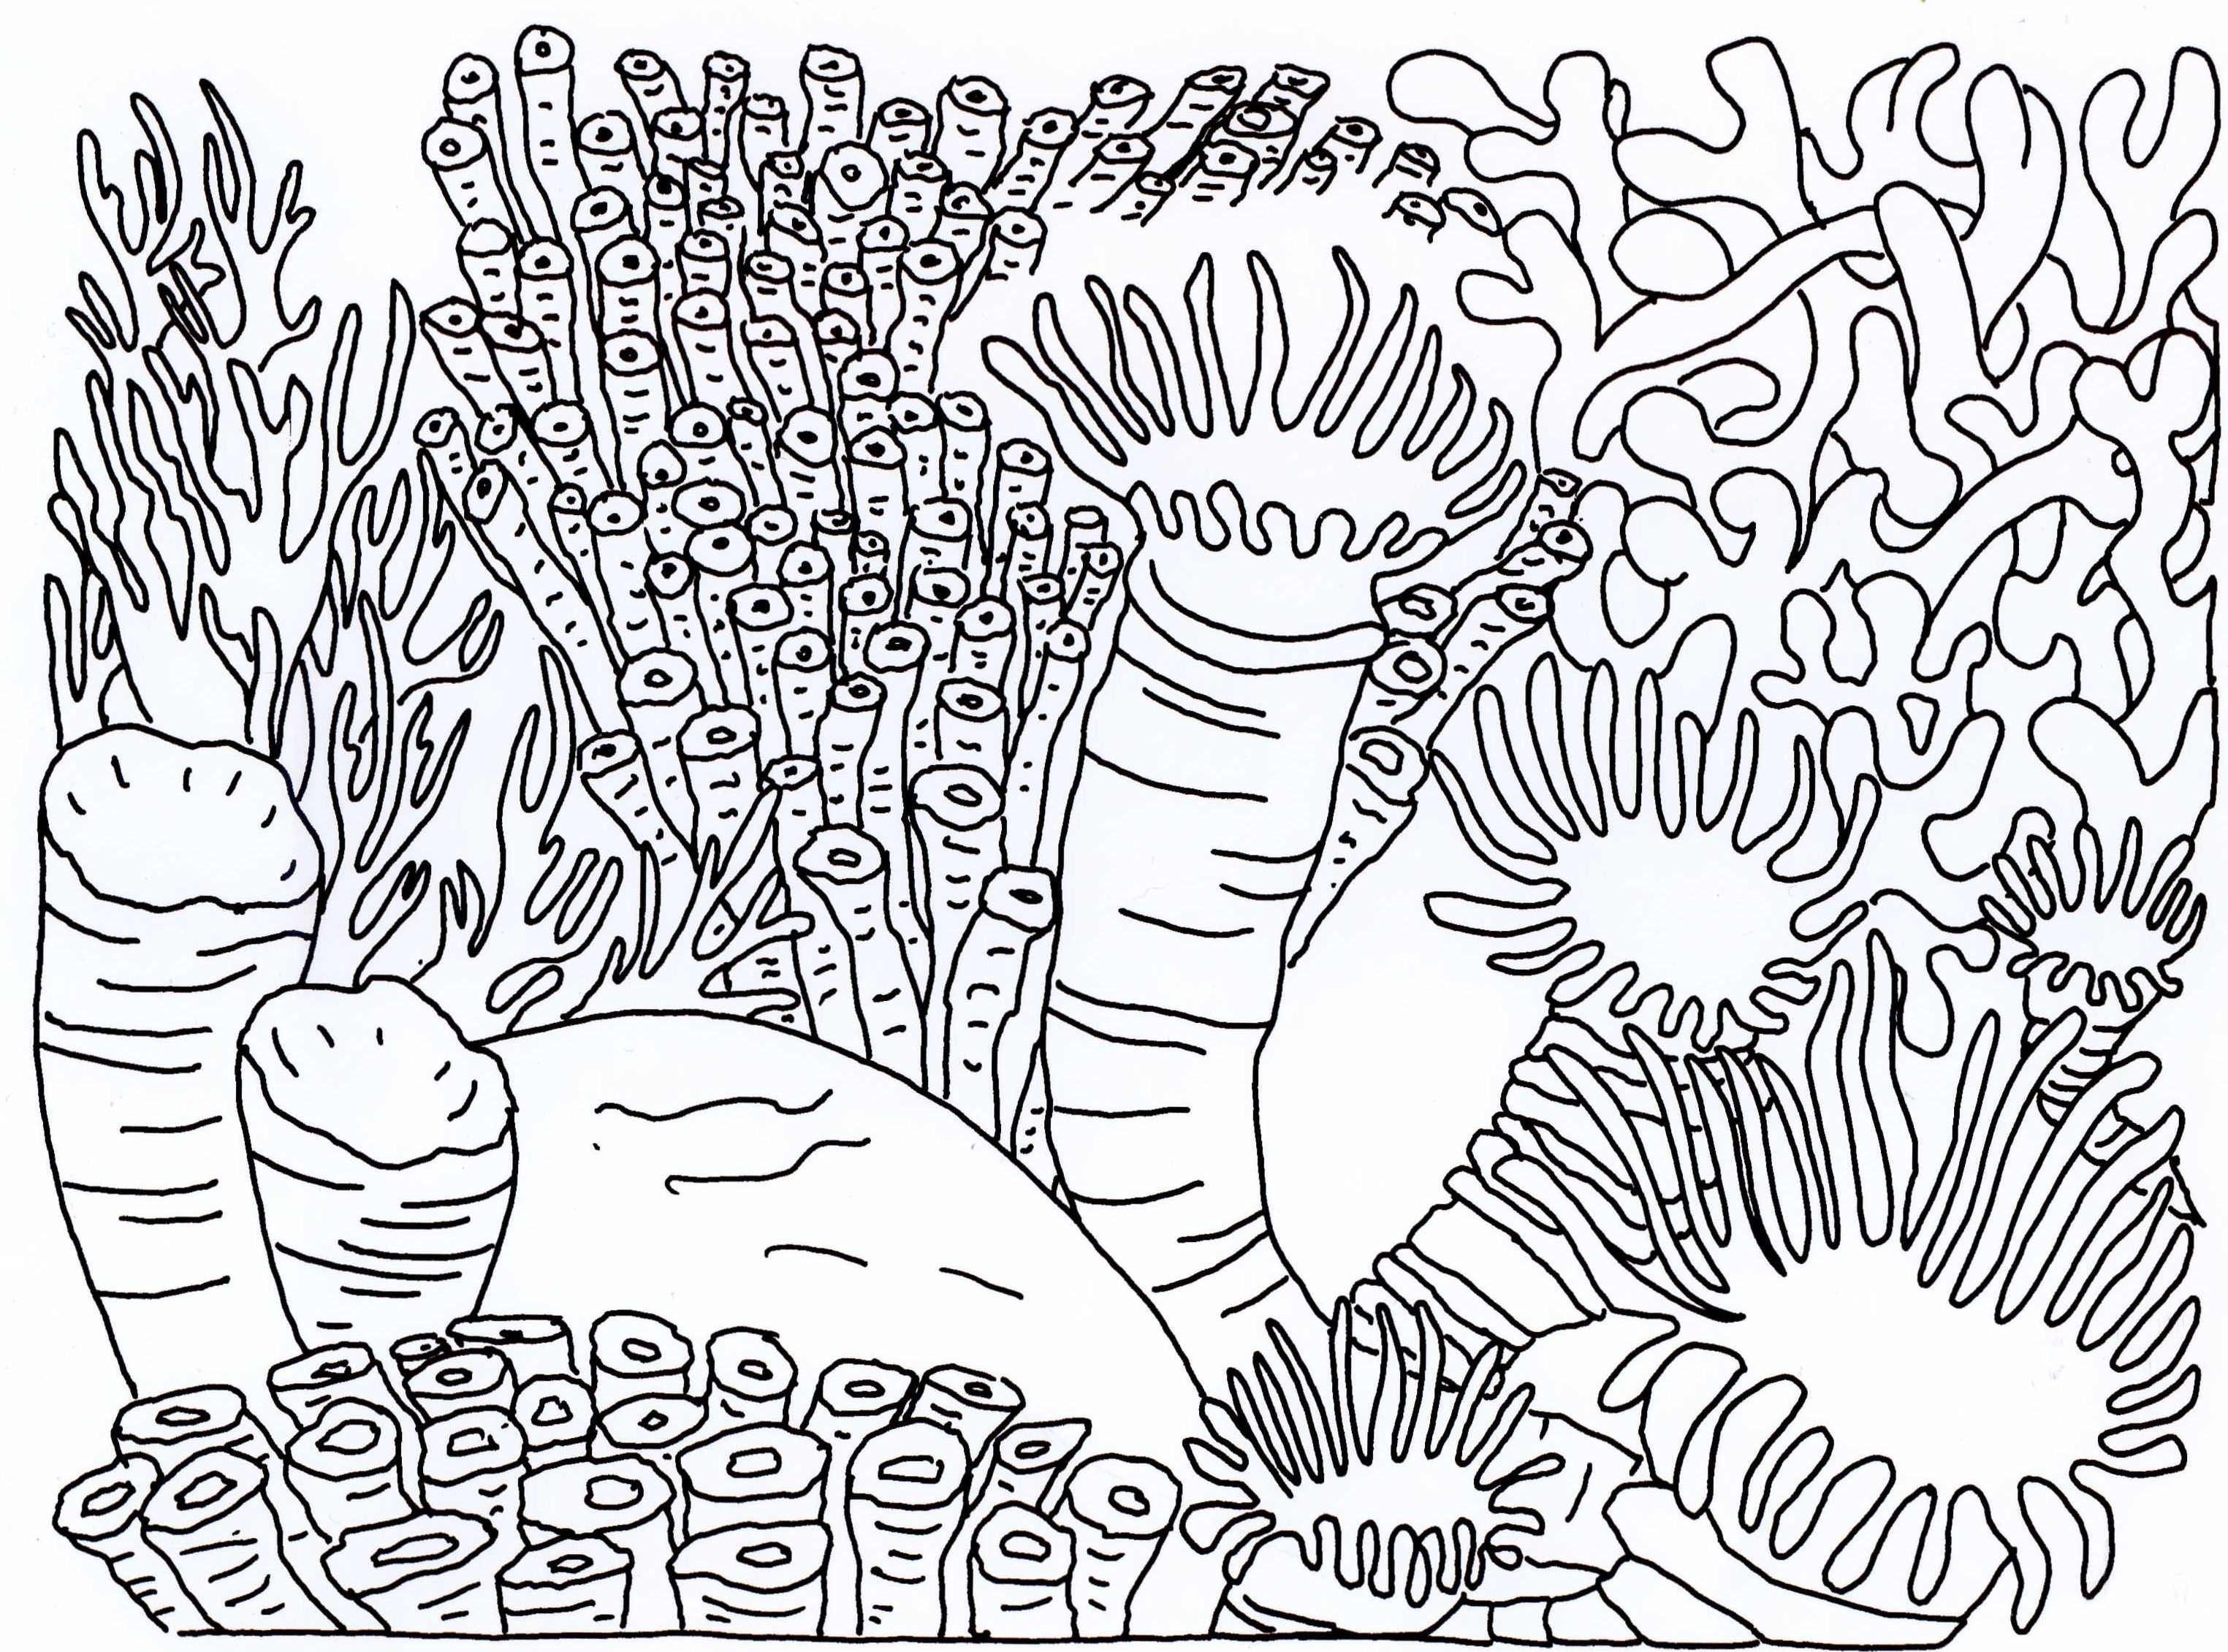 Free Great Barrier Reef Coloring Pages, Download Free Great Barrier ...